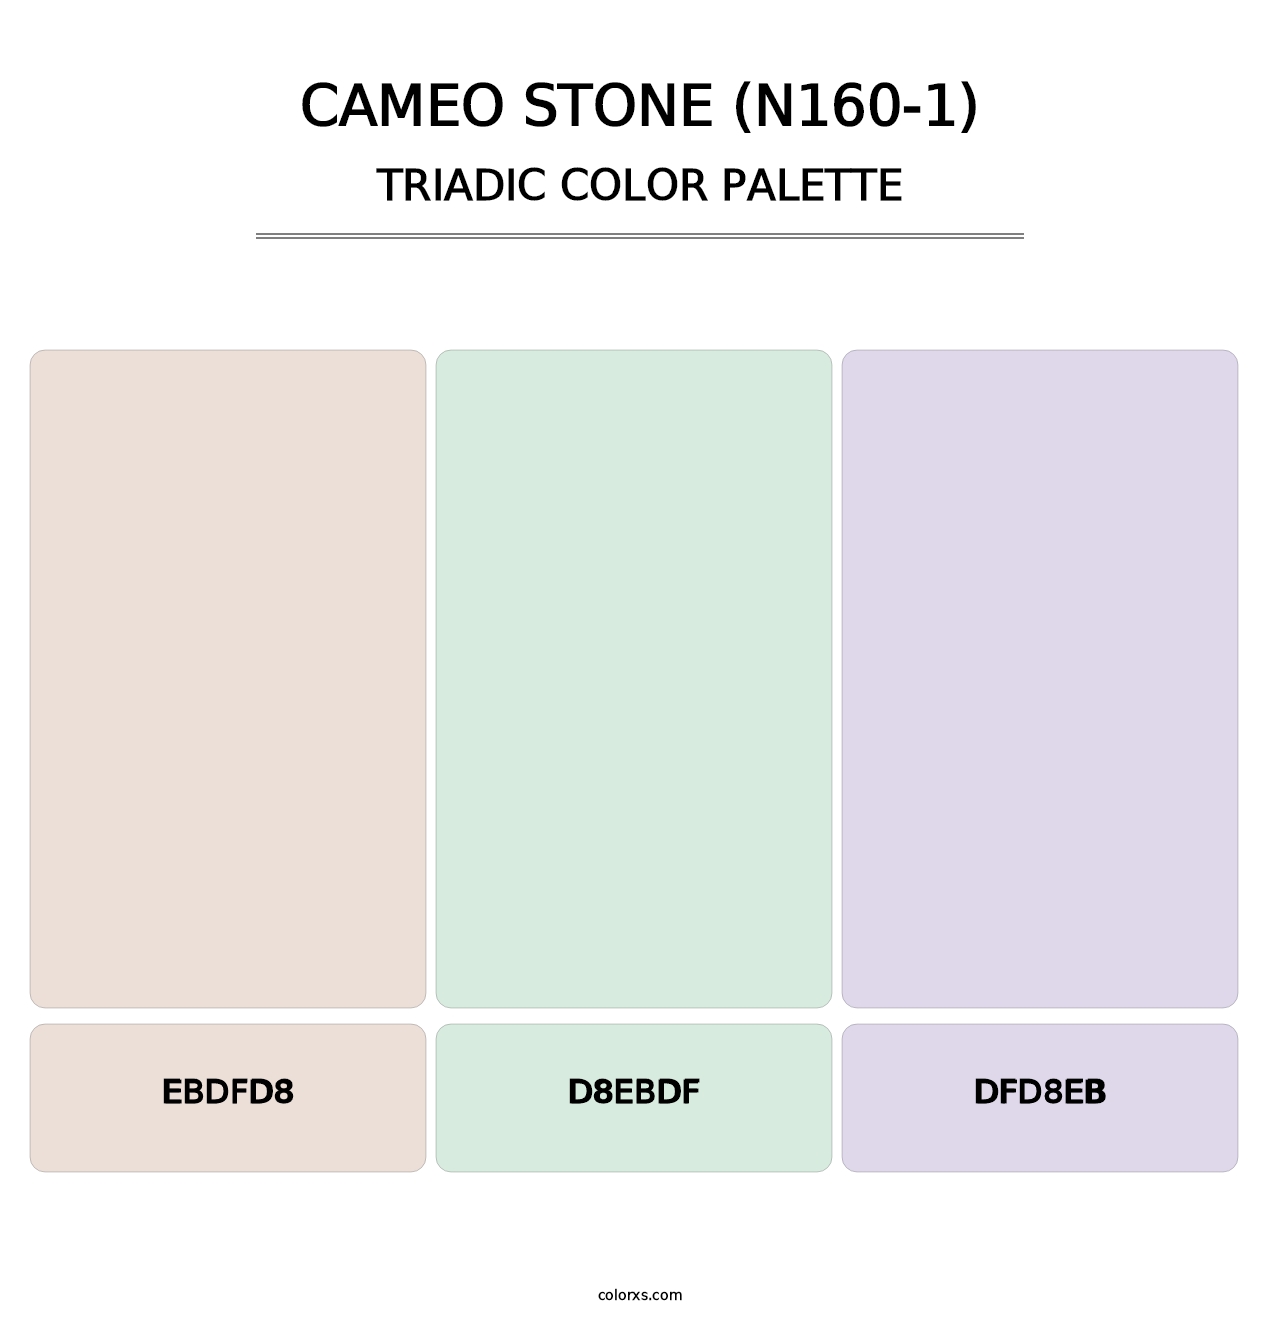 Cameo Stone (N160-1) - Triadic Color Palette